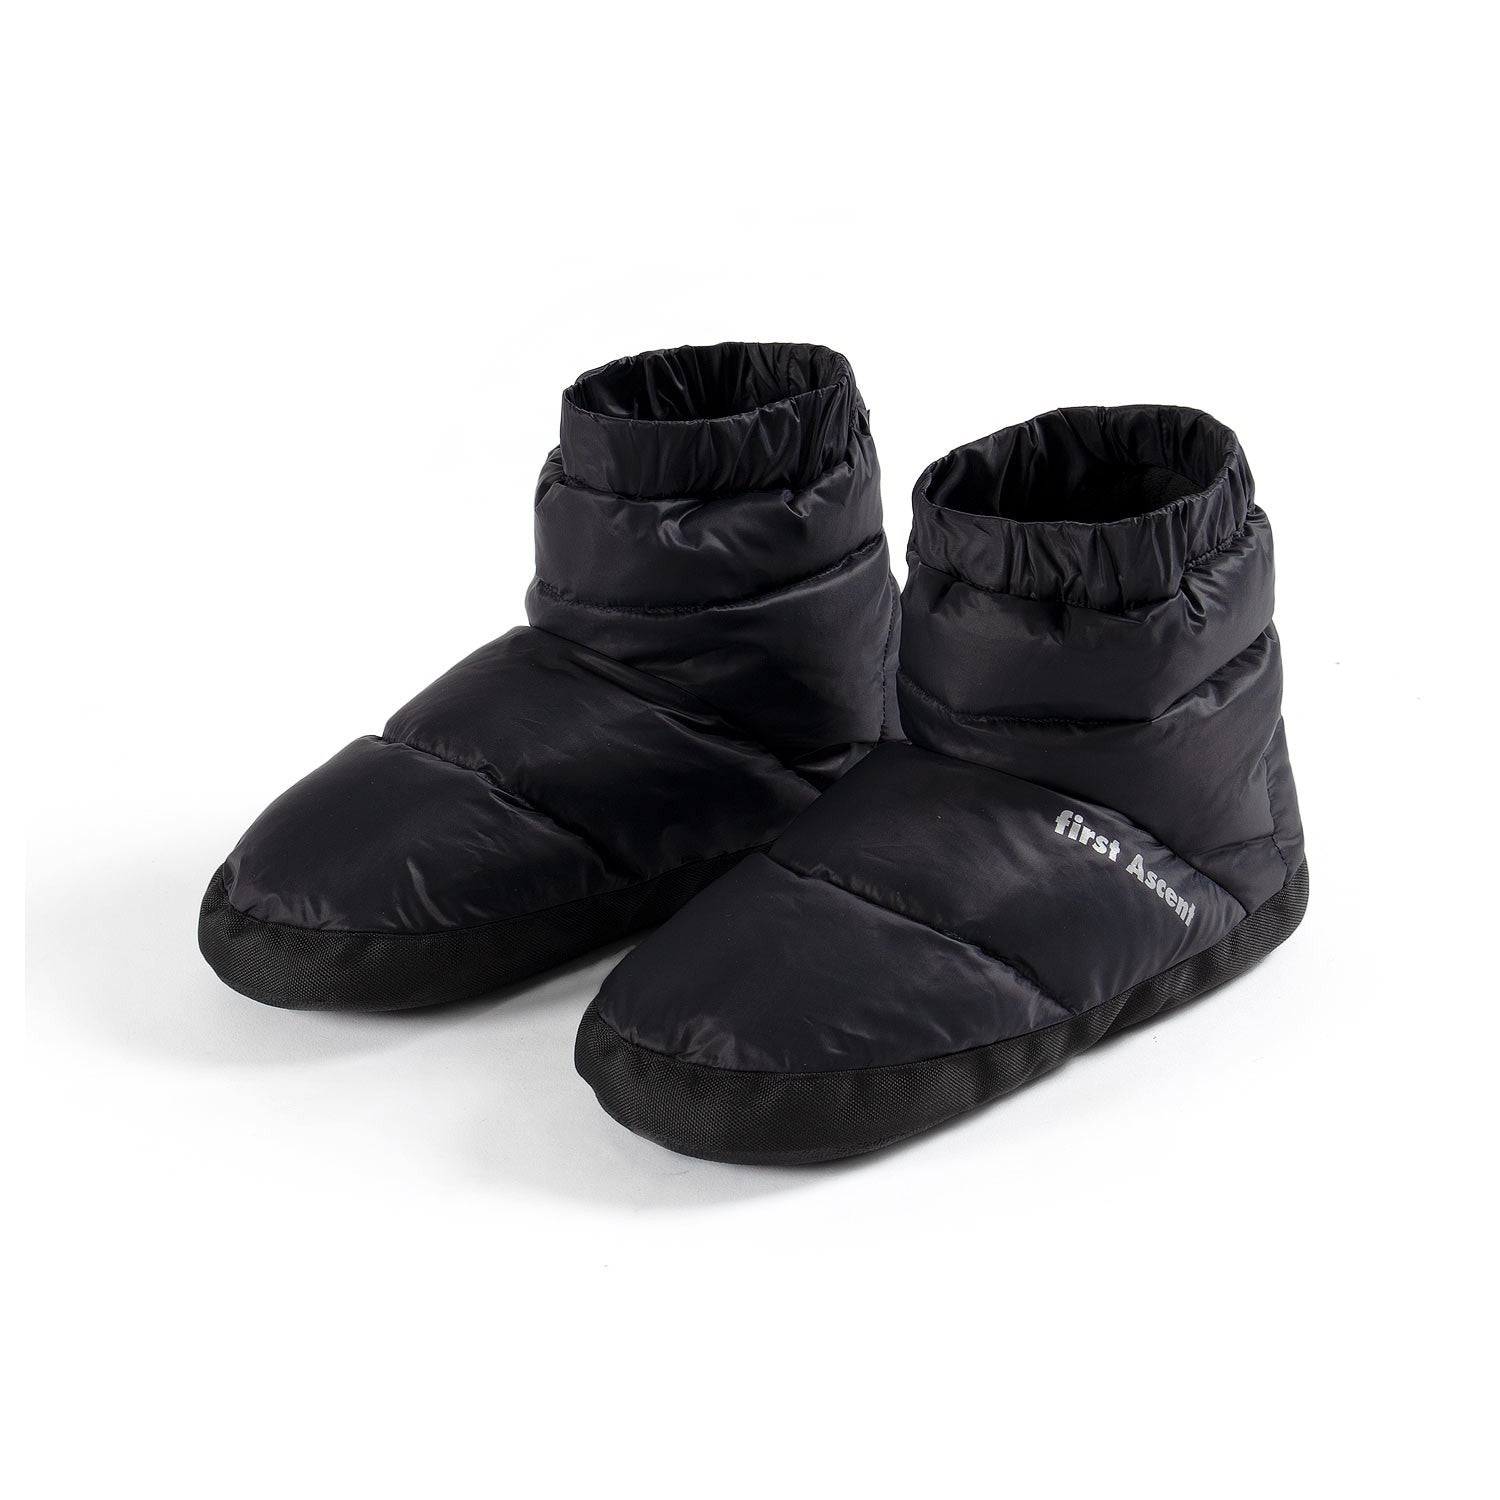 First Ascent Down Bootie Slippers